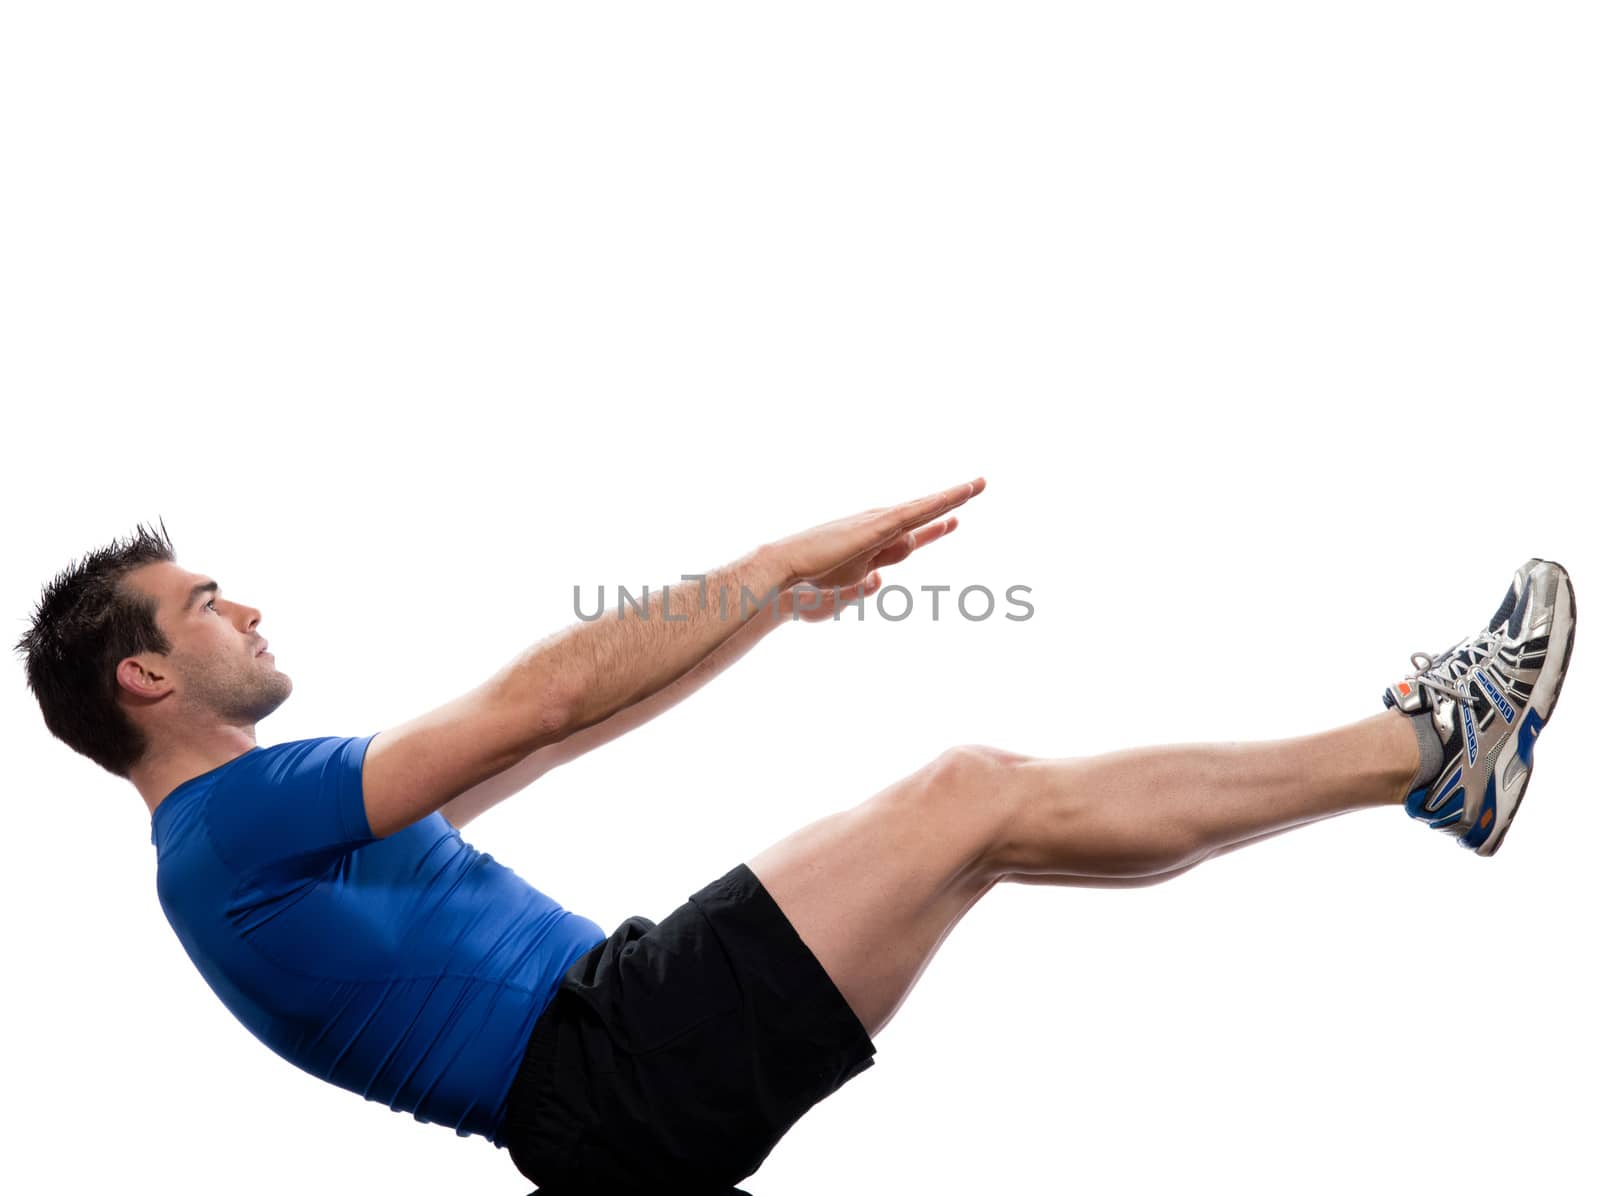 man on Abdominals workout posture on white background.
Spice it up. This time bring your thighs to vertical and bend your knees to 45 degrees.

Now lift the shoulders from the floor, and keep the abdominal muscles continuously contracted. Lift your hands from the mat with the palms still facing down and keep your arms straight. Raise your hands up a couple of inches and push them down hard. Perform this motion rhythmically for one hundred arm movements, about twice every second. It's easier if you imagine that you're repeatedly tapping on an invisible pillow, while never touching the mat. Remember to keep the small of your back against the floor.

When breathing, exhale slowly through pursed lips, count five arm movements, and inhale. If you're doing the exercise correctly, you'll notice that every time you push the hands down, the contraction of the muscles helps push the air out.